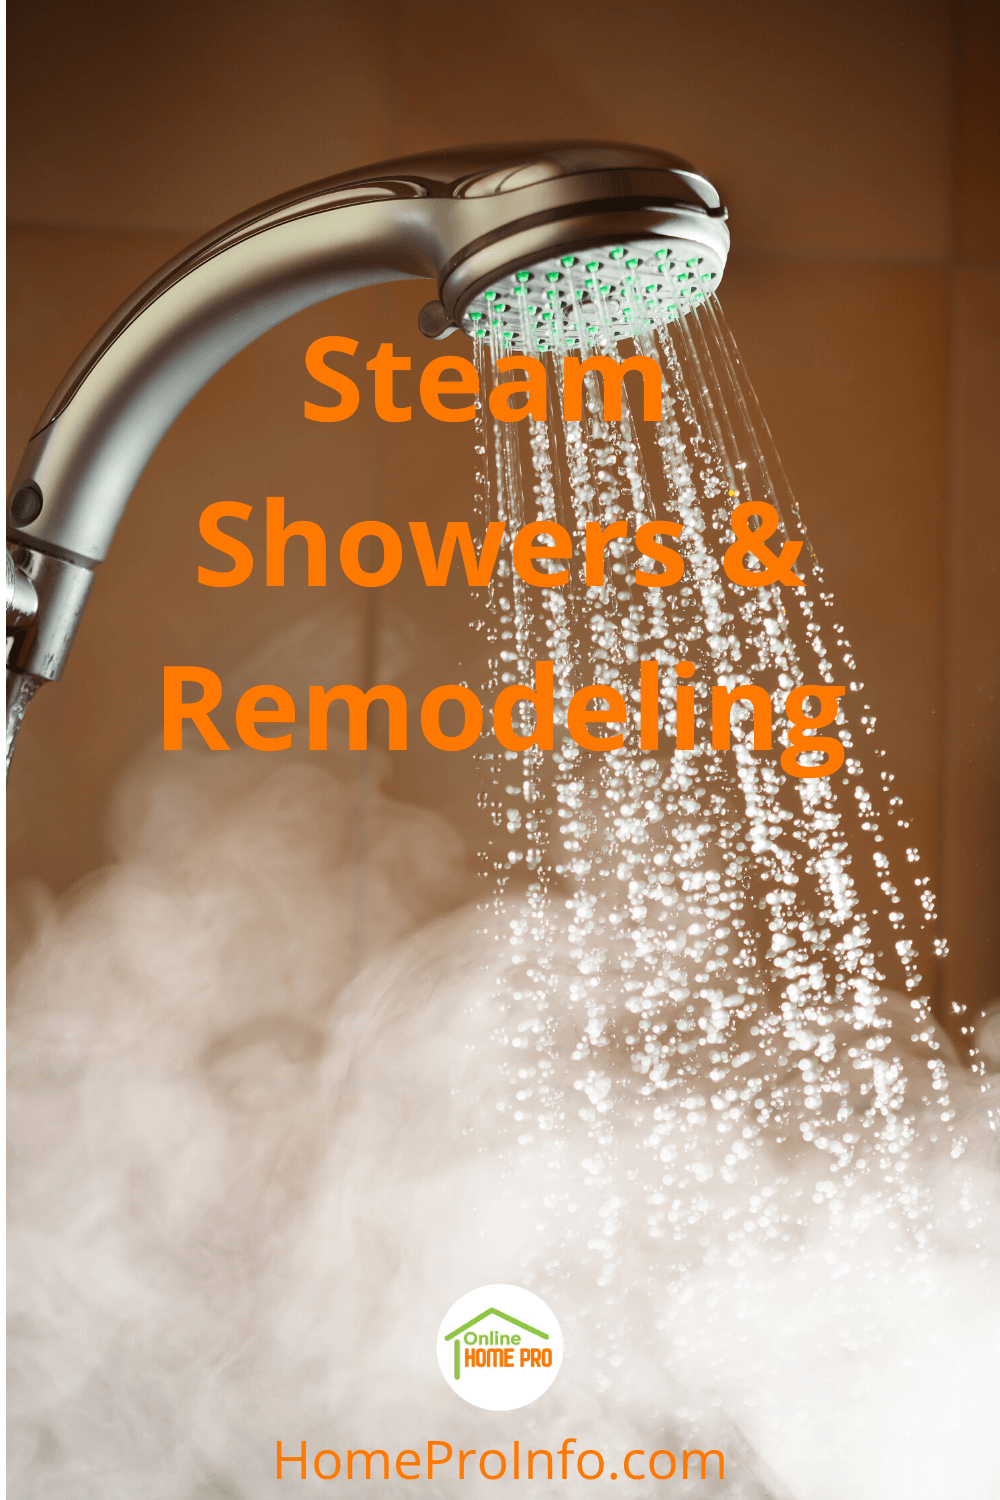 steam showers & remodeling